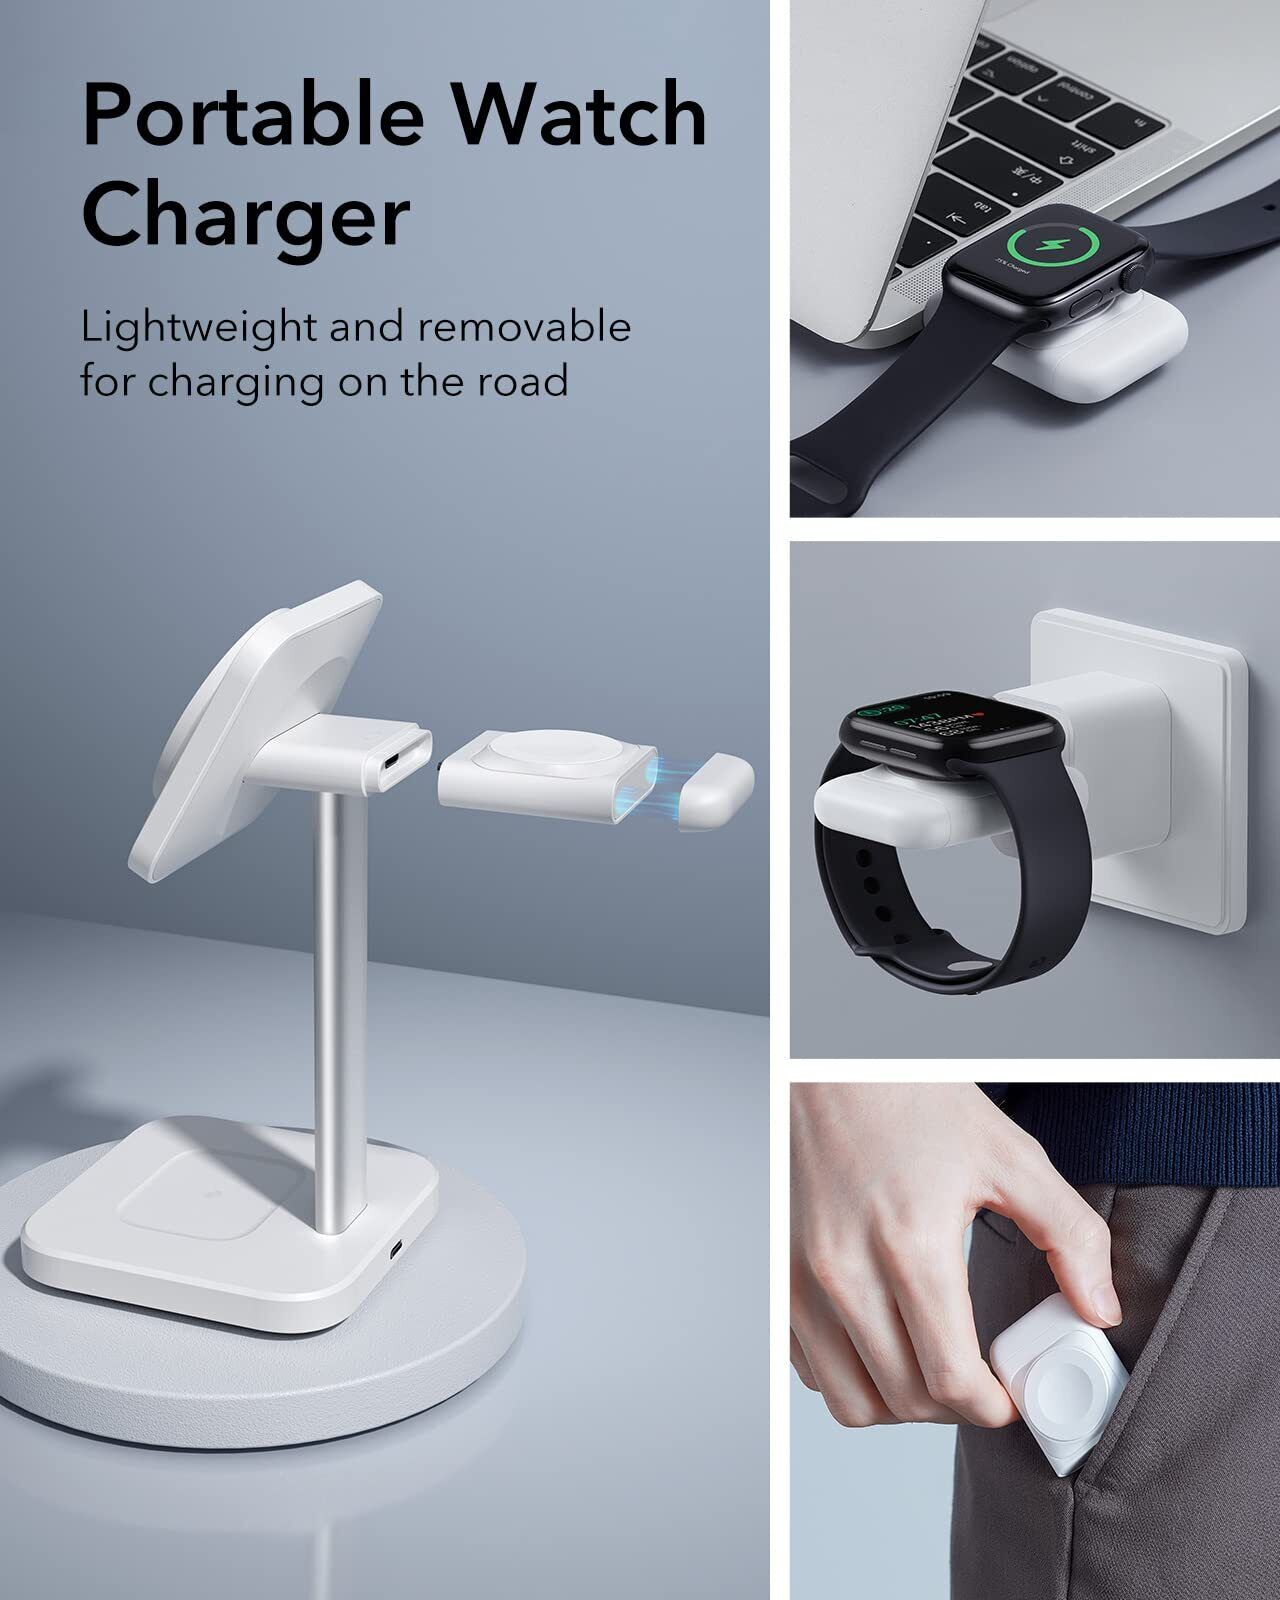 SALE／70%OFF】 ESR 3-in-1 MagSafe Charger Stand (HaloLock), Removable Made  for Apple Watch Certified Charger, MagSafe Charging Station, Magnetic Wireless  Charger, iP